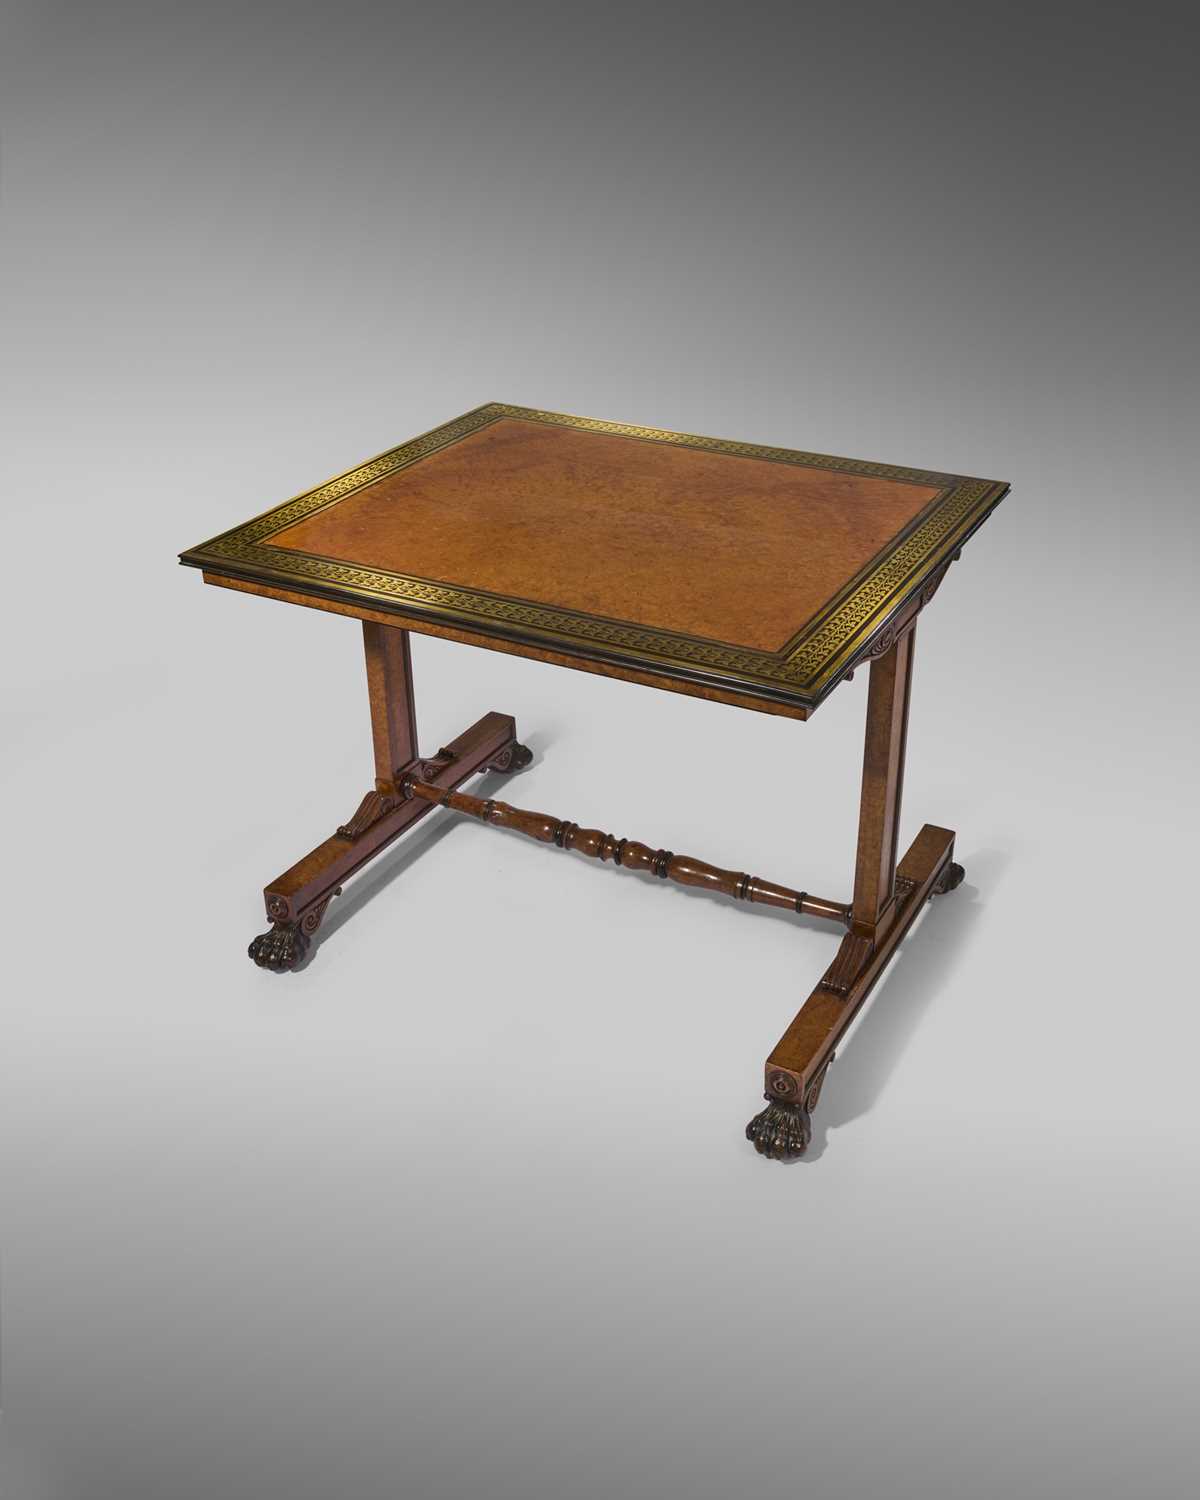 A FINE REGENCY BURR OAK AND BRASS MARQUETRY LIBRARY TABLE ATTRIBUTED TO GEORGE BULLOCK, C.1815 the